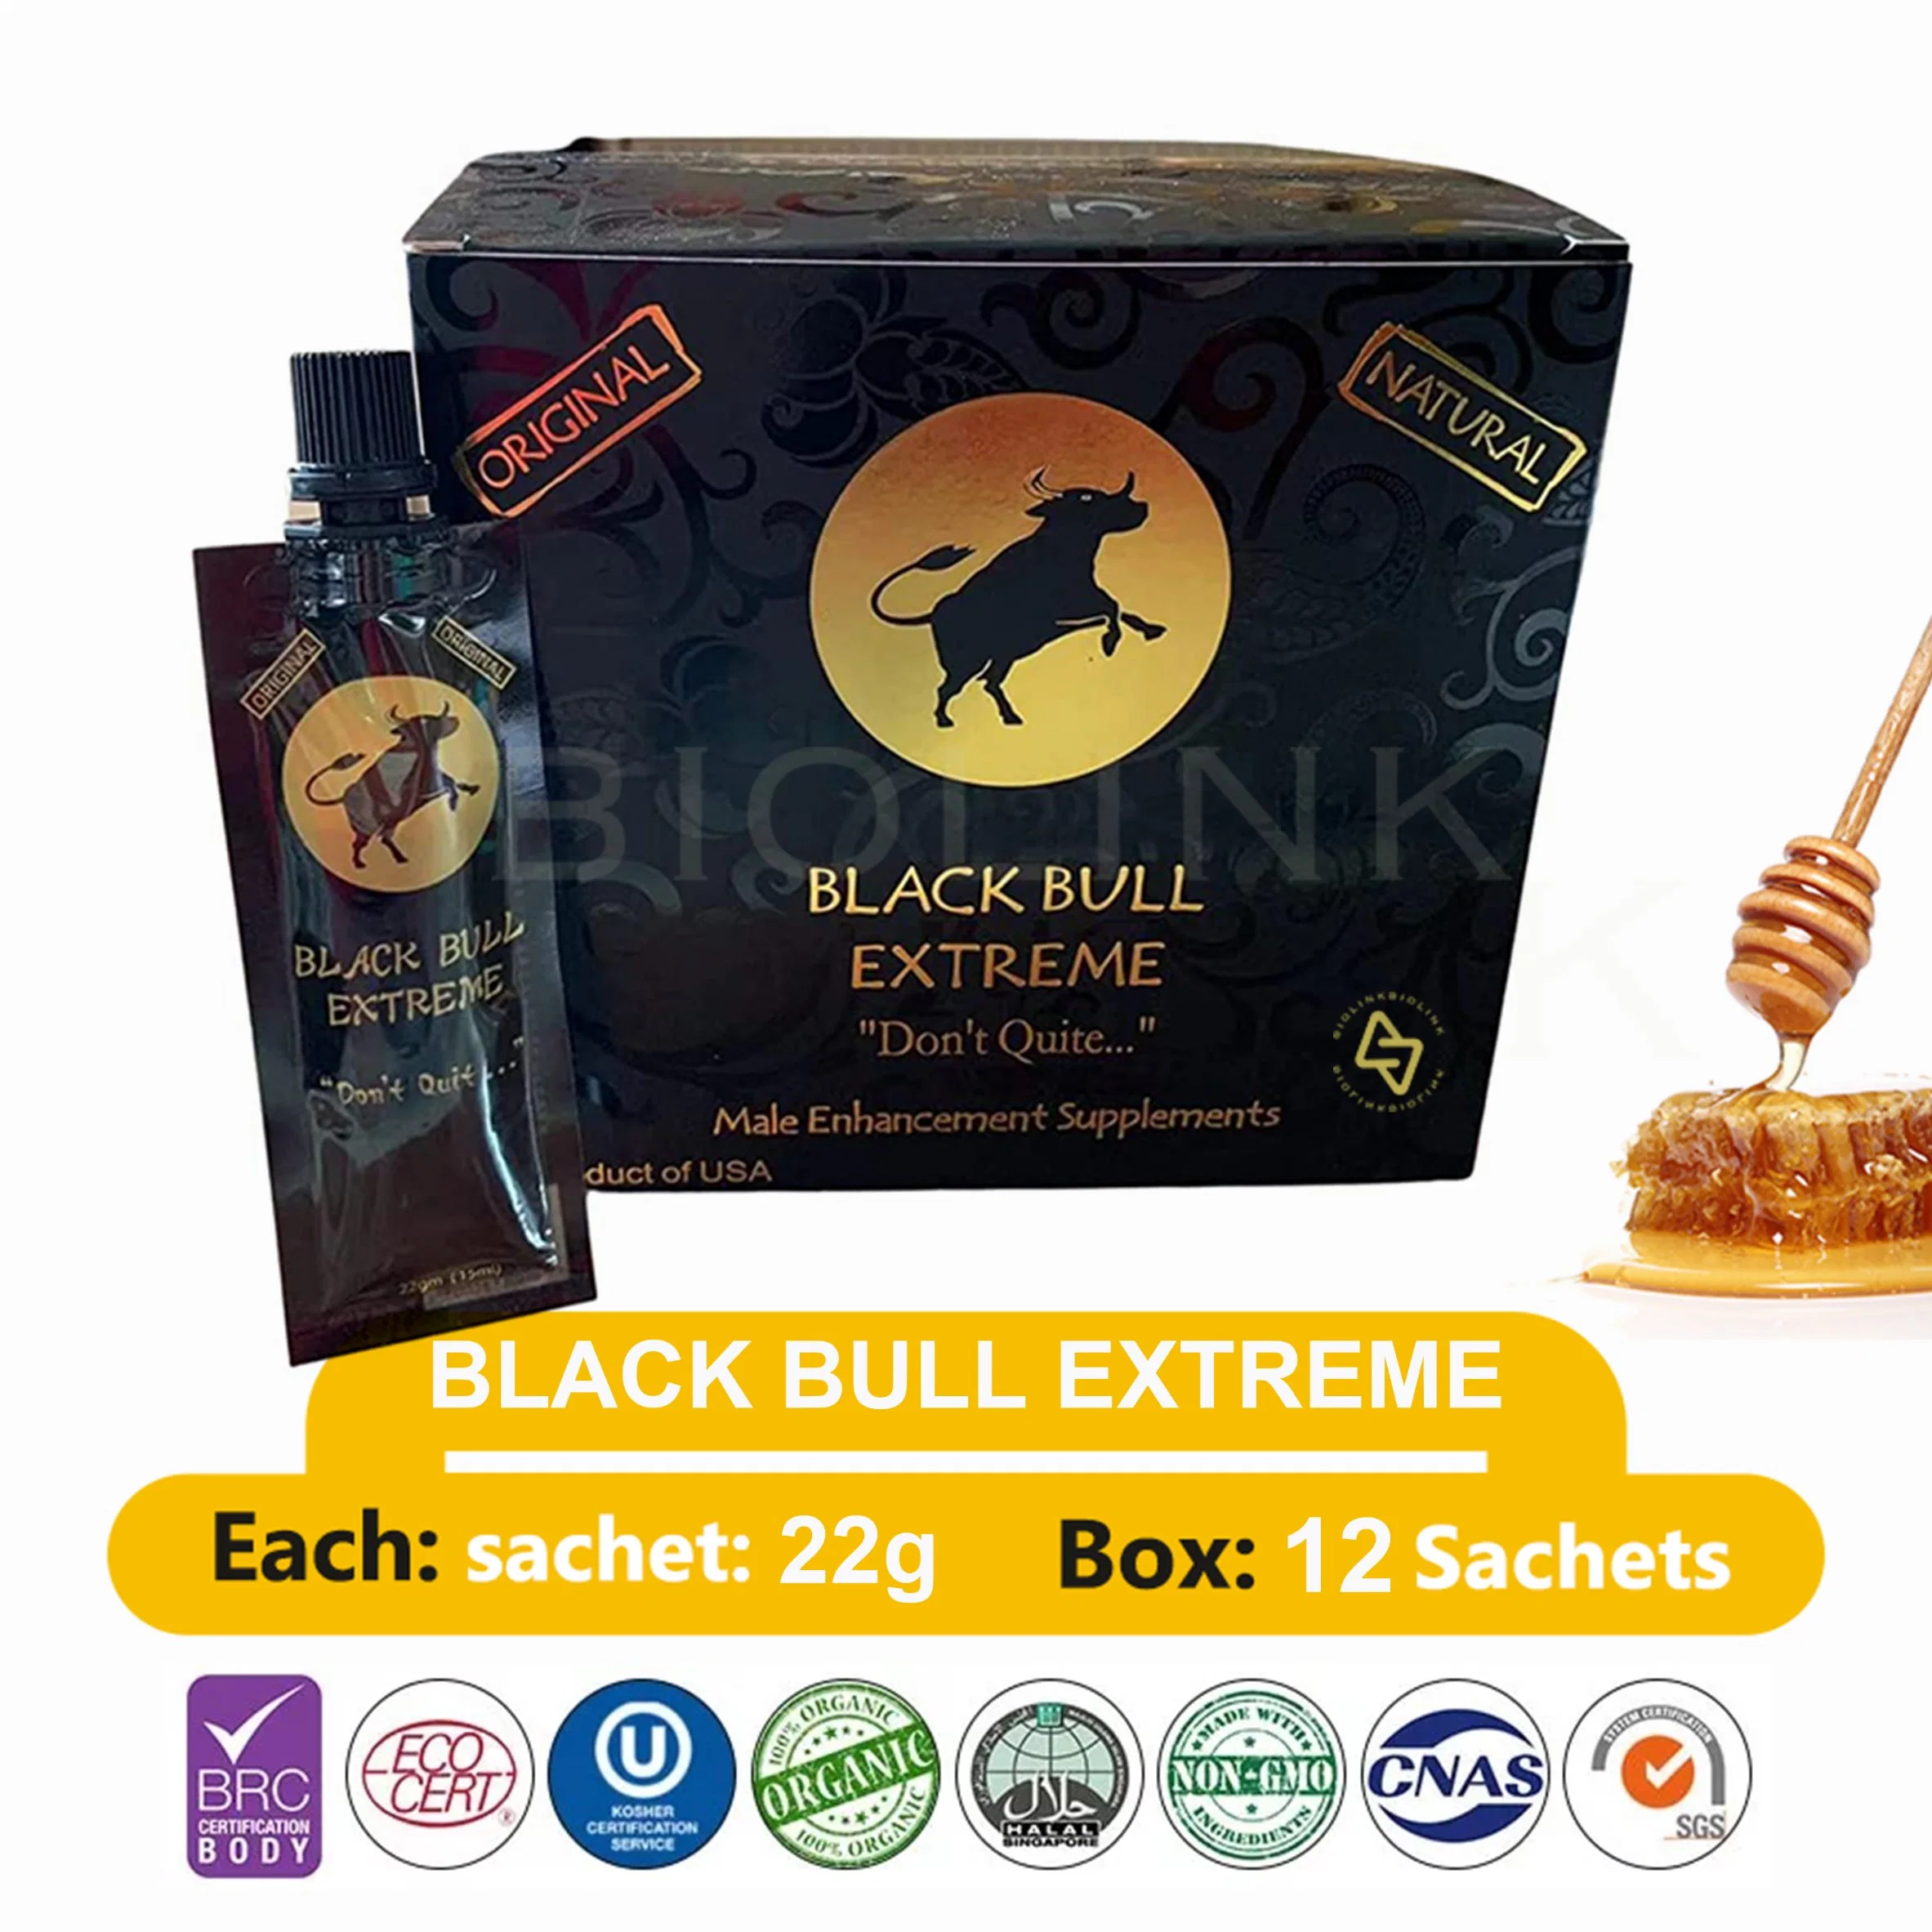 Organic Dietary Supplements Black Bull Extreme Royal Honey for Men Performance 12 Pouches-22g